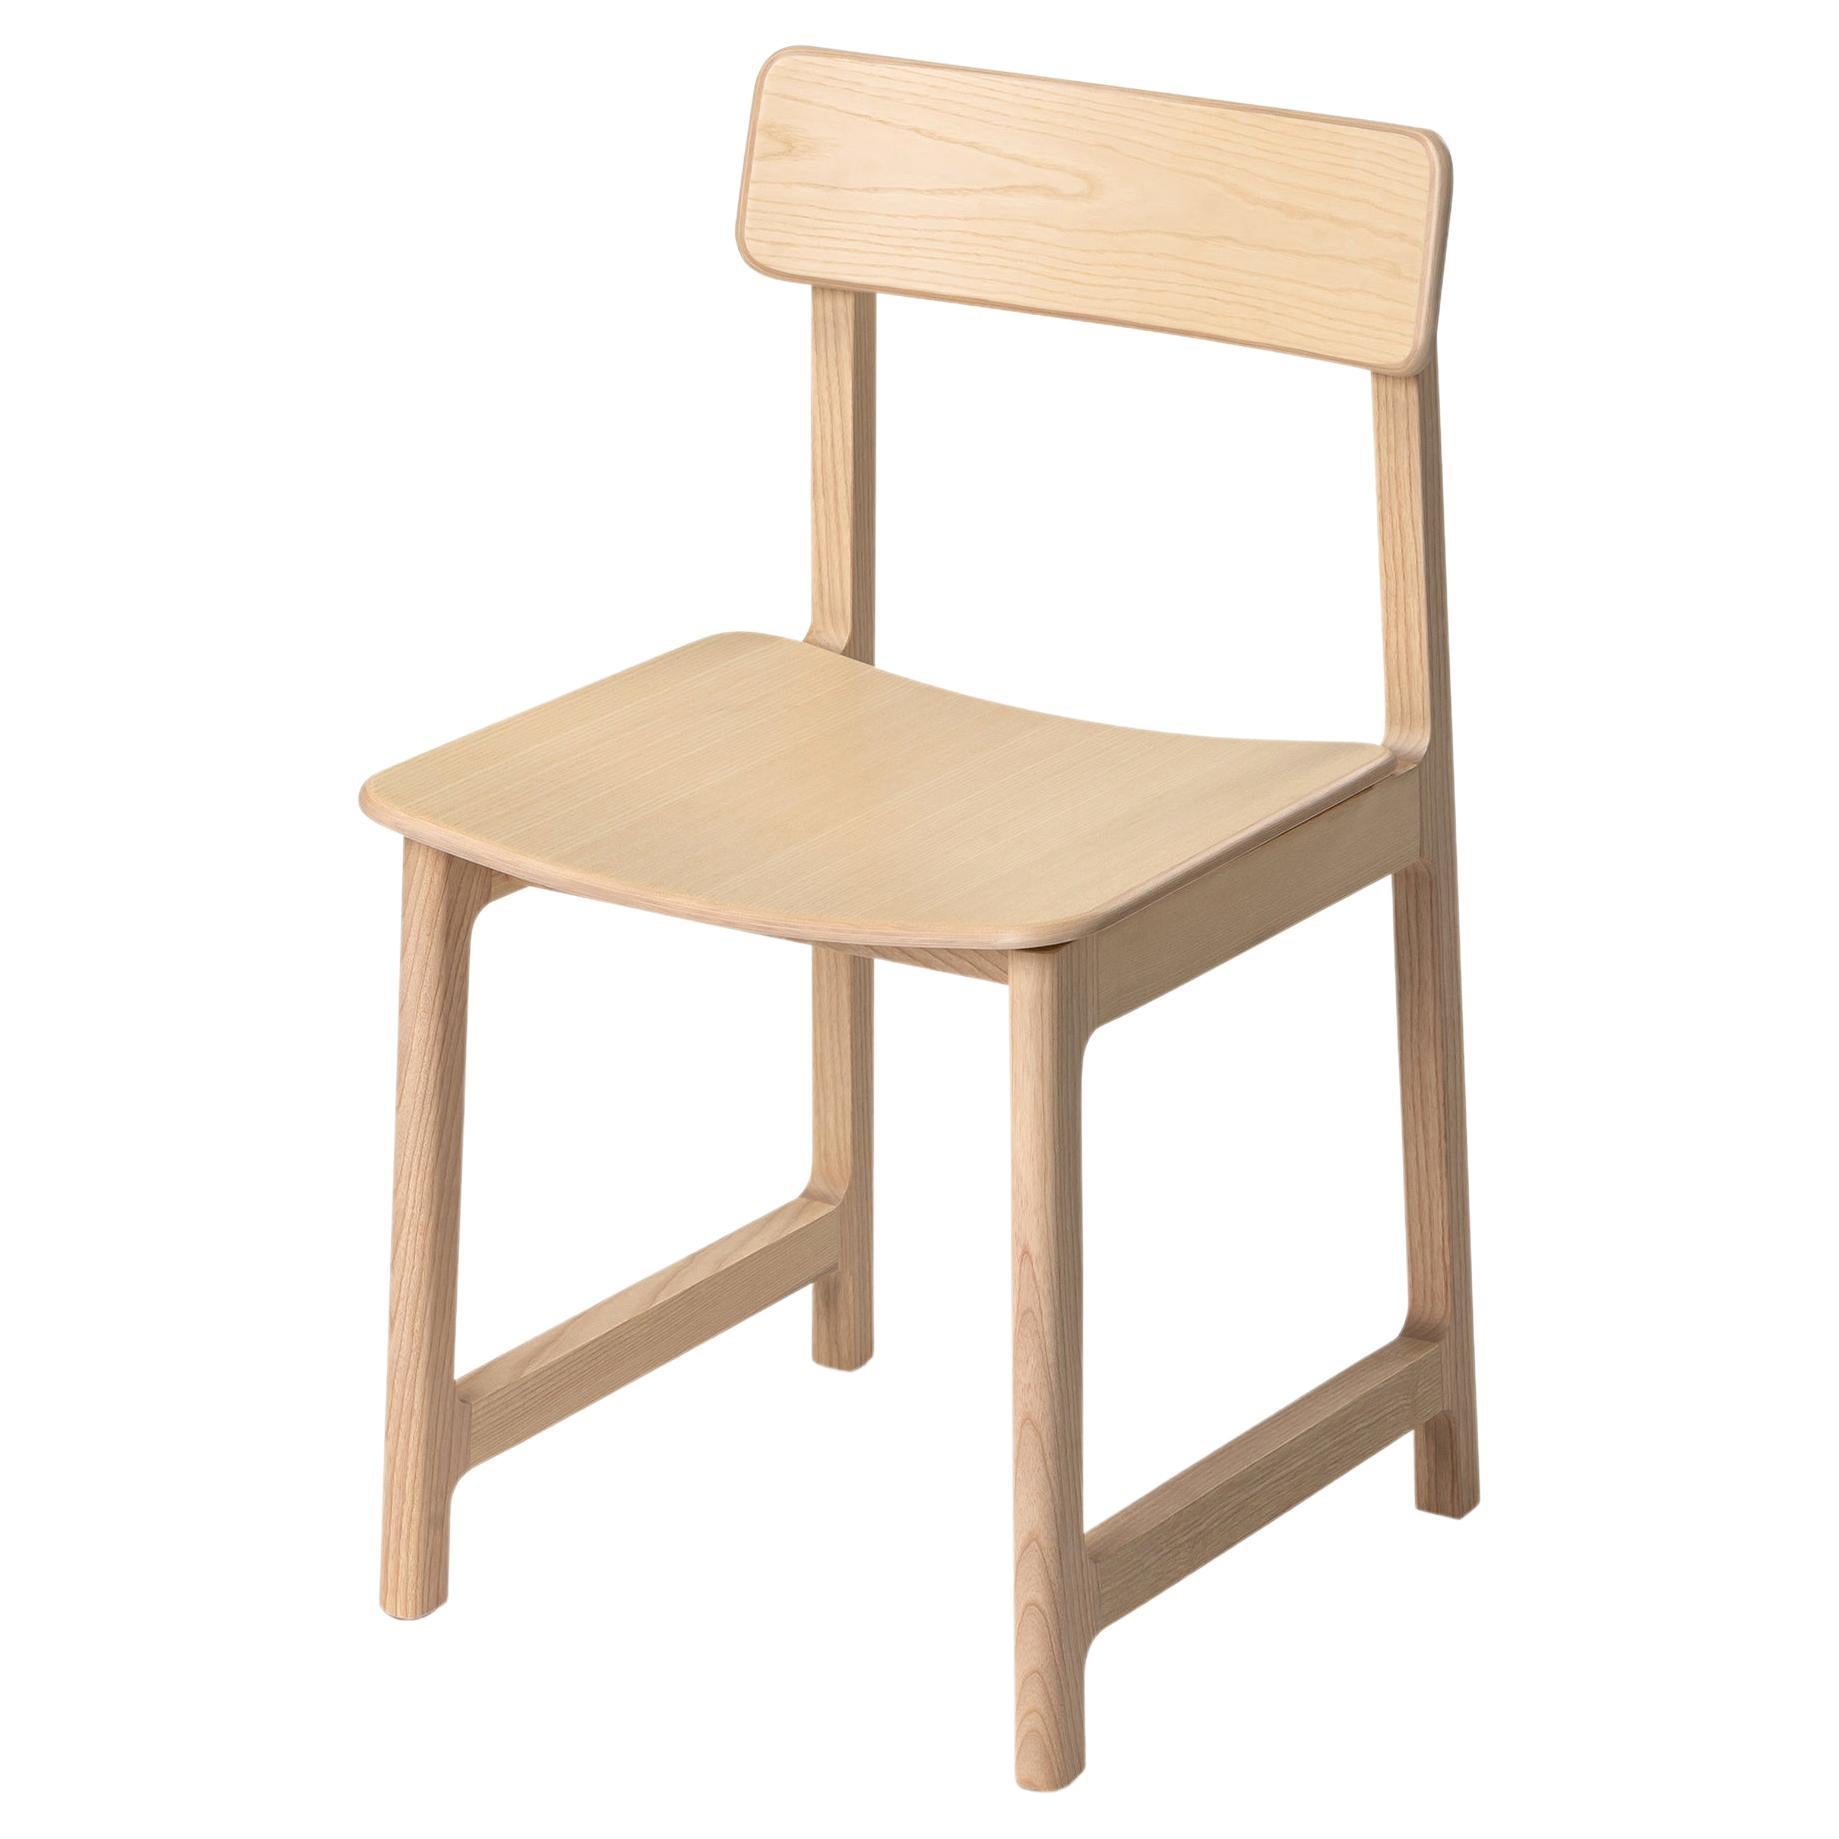 Minimalist Modern Chair in Ash Wood FRAME Collection For Sale